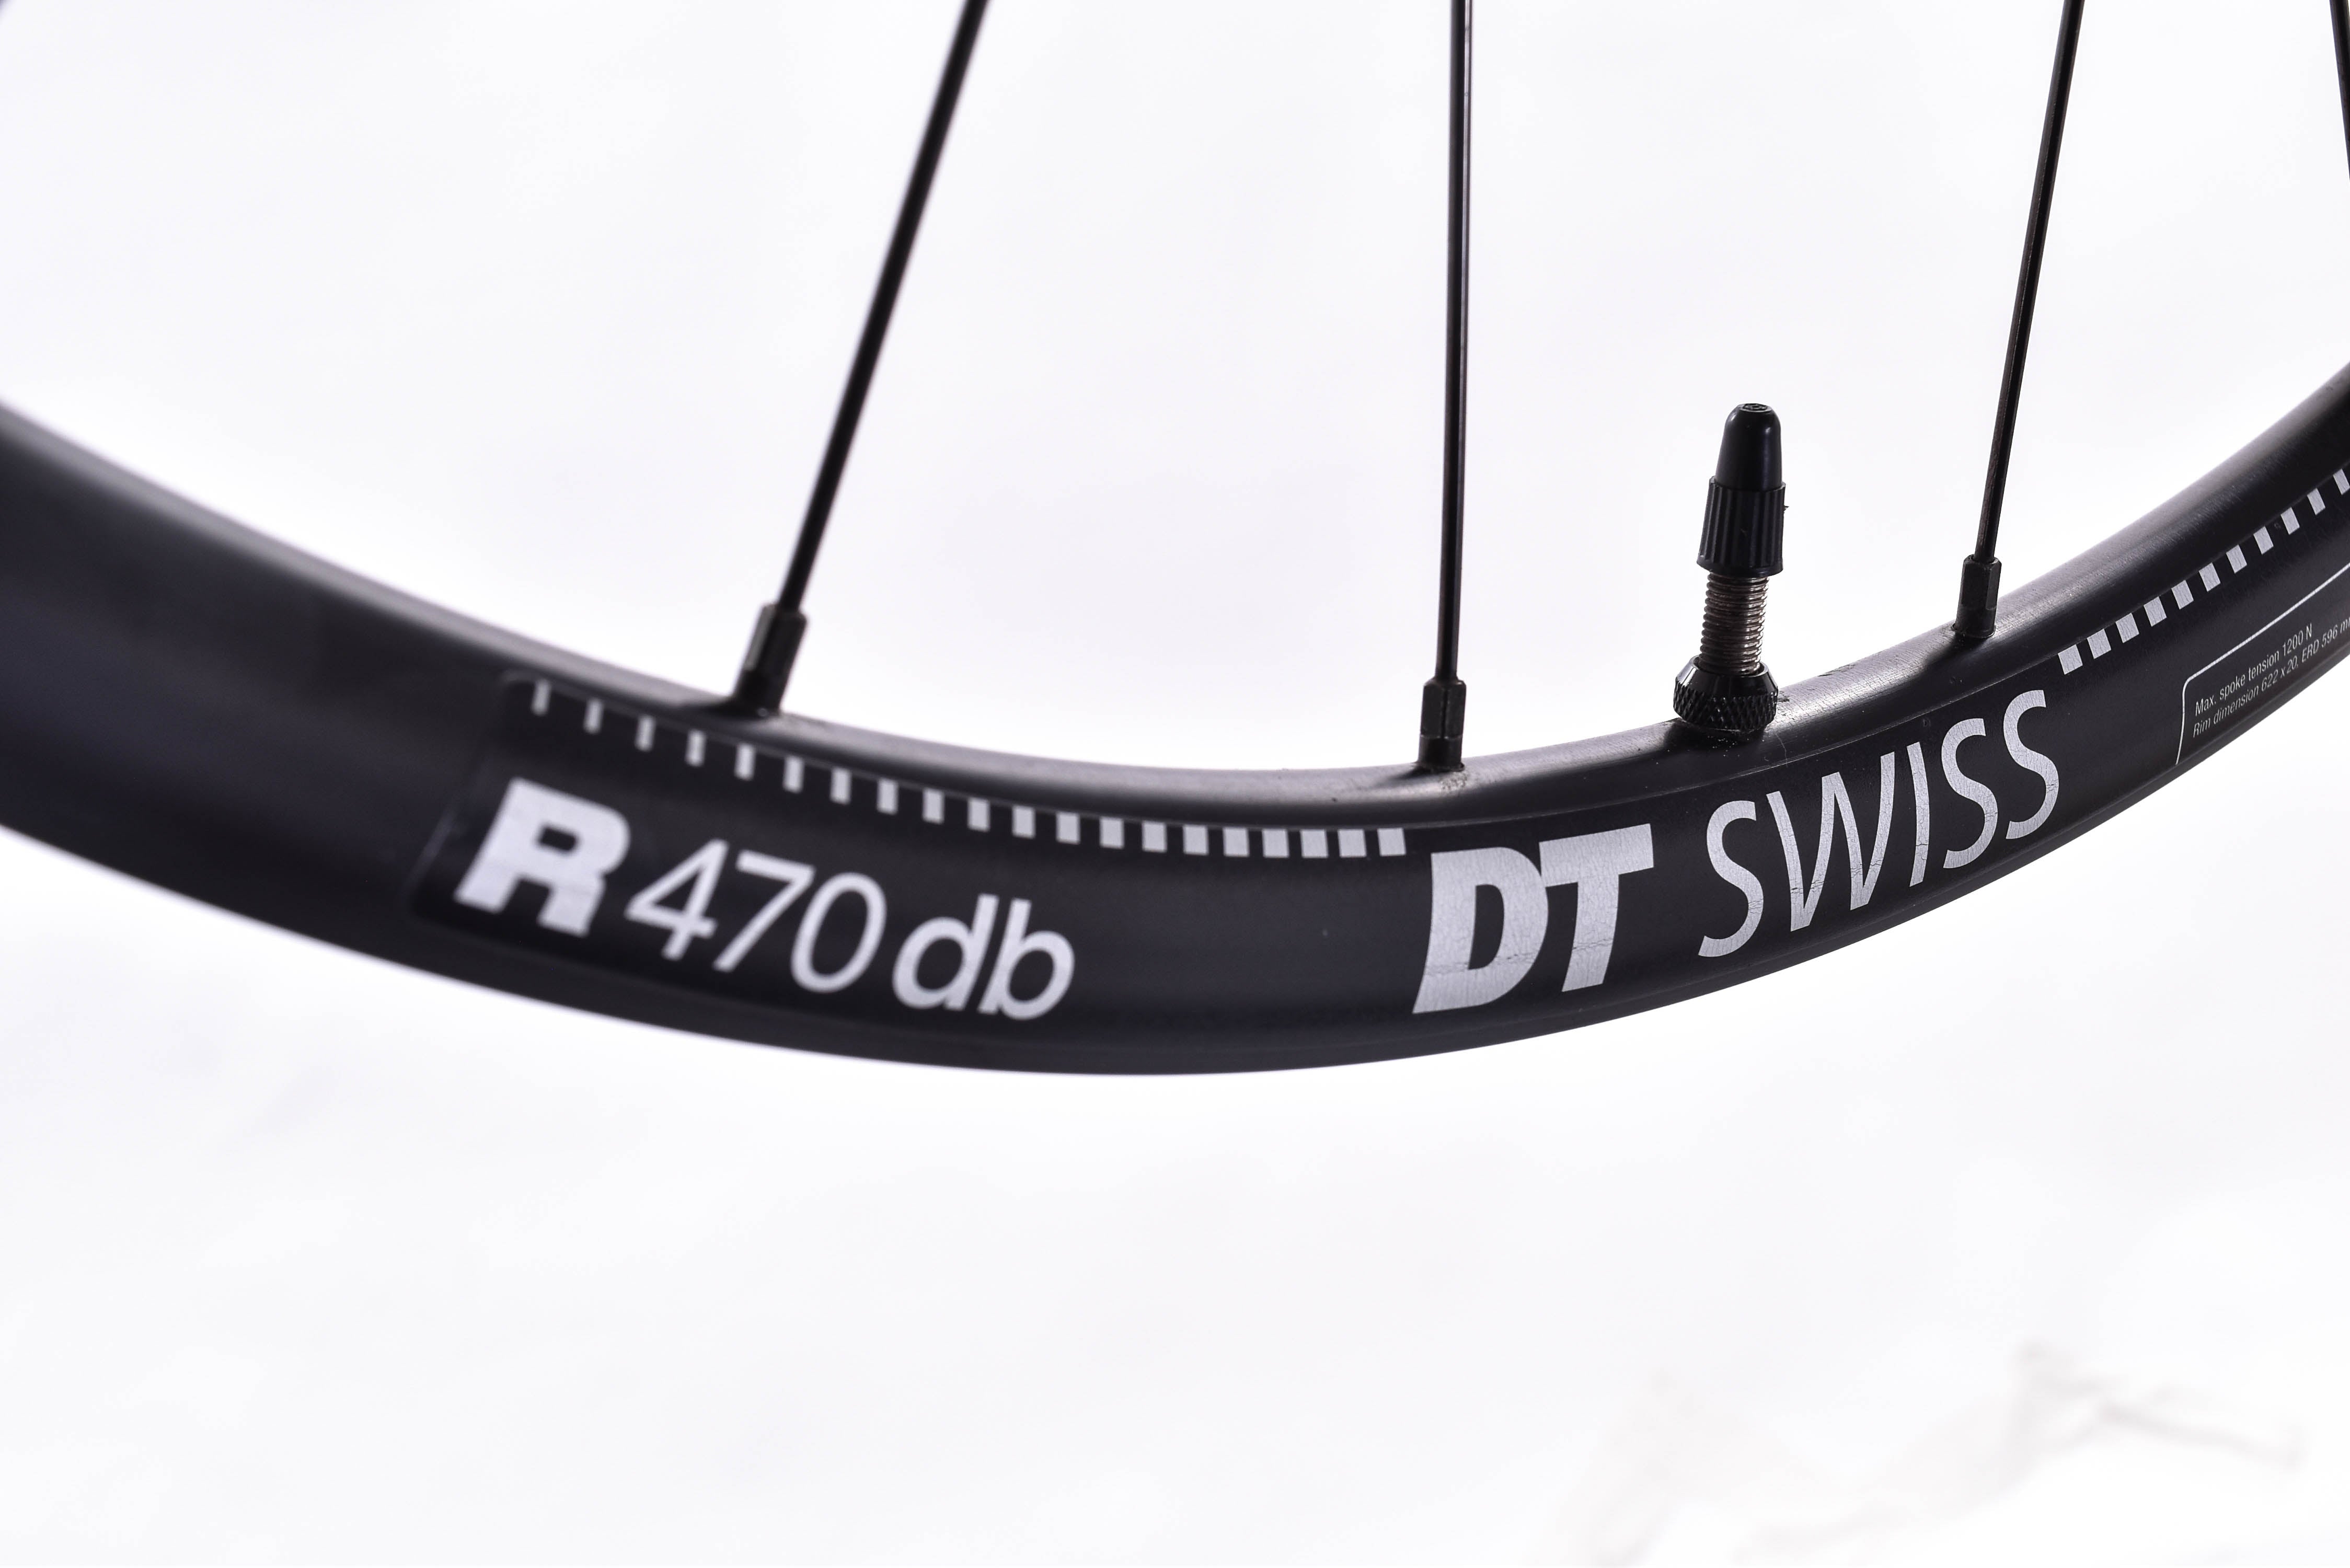 USED DT Swiss R470 db 700C Alloy Tubeless Thru Axle wheelset Shimano H